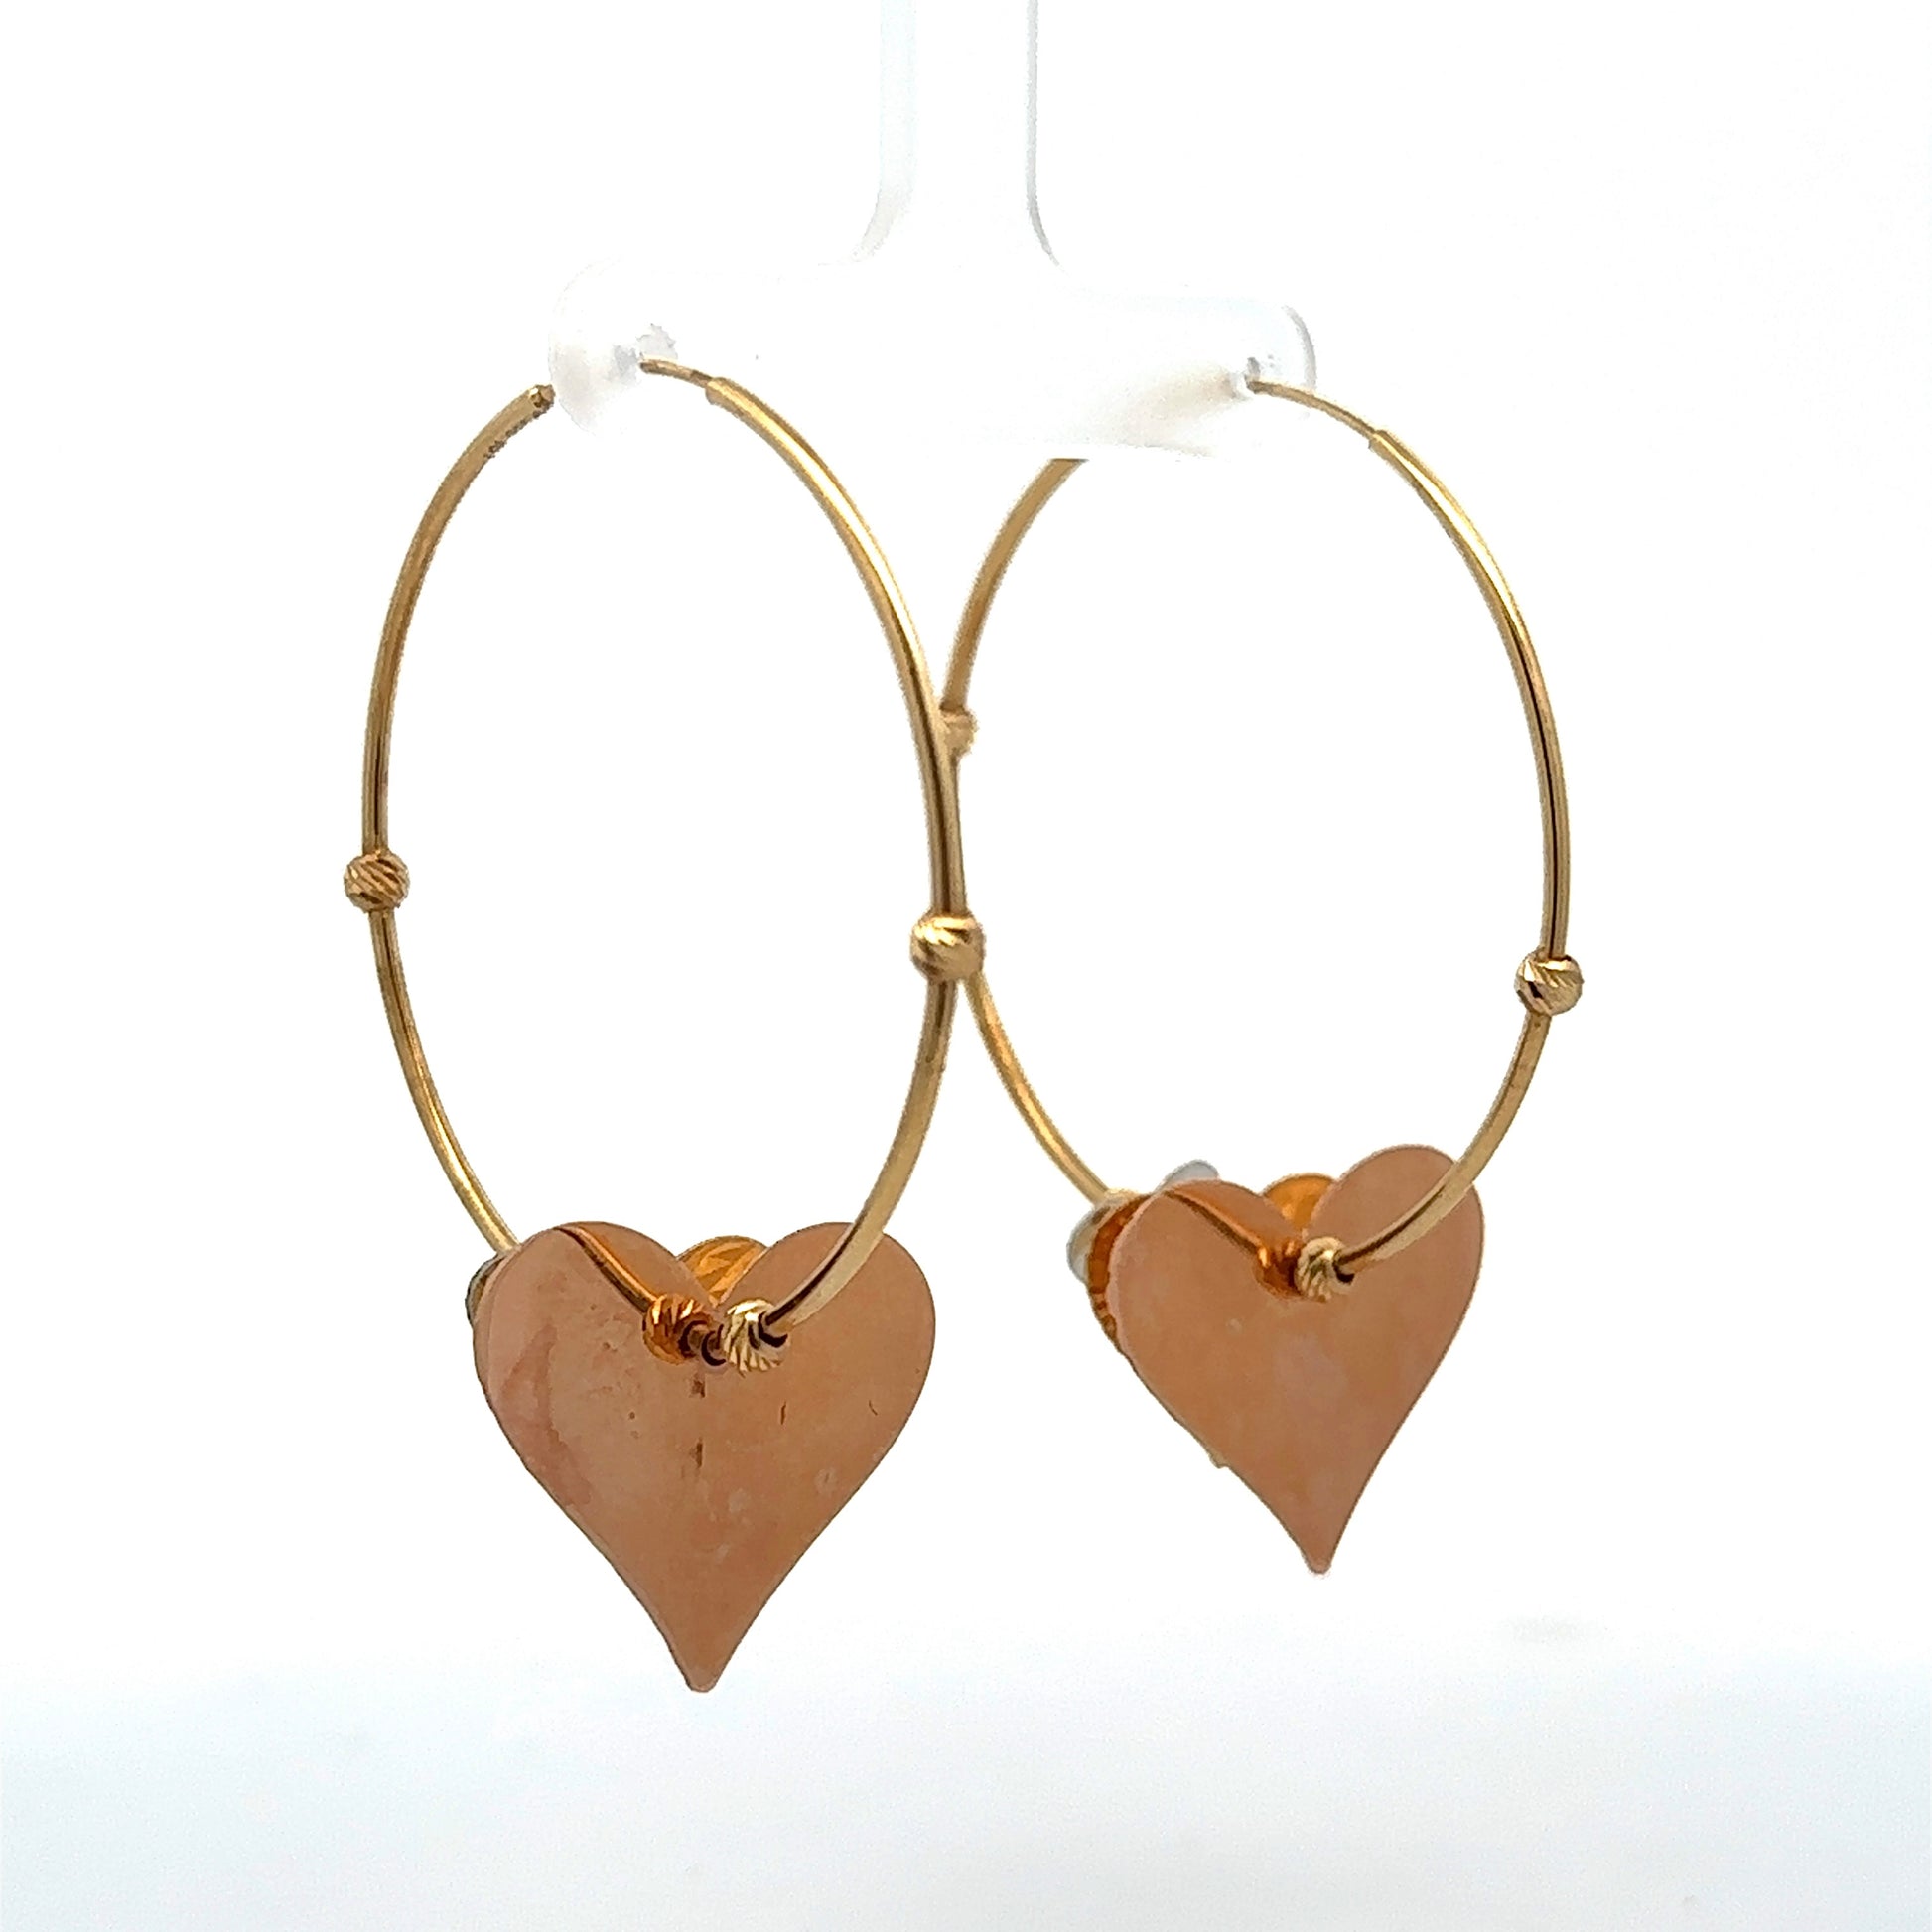 Diagonal back view of yellow gold hoops with rose gold heart. Rose gold heart has marks on the back